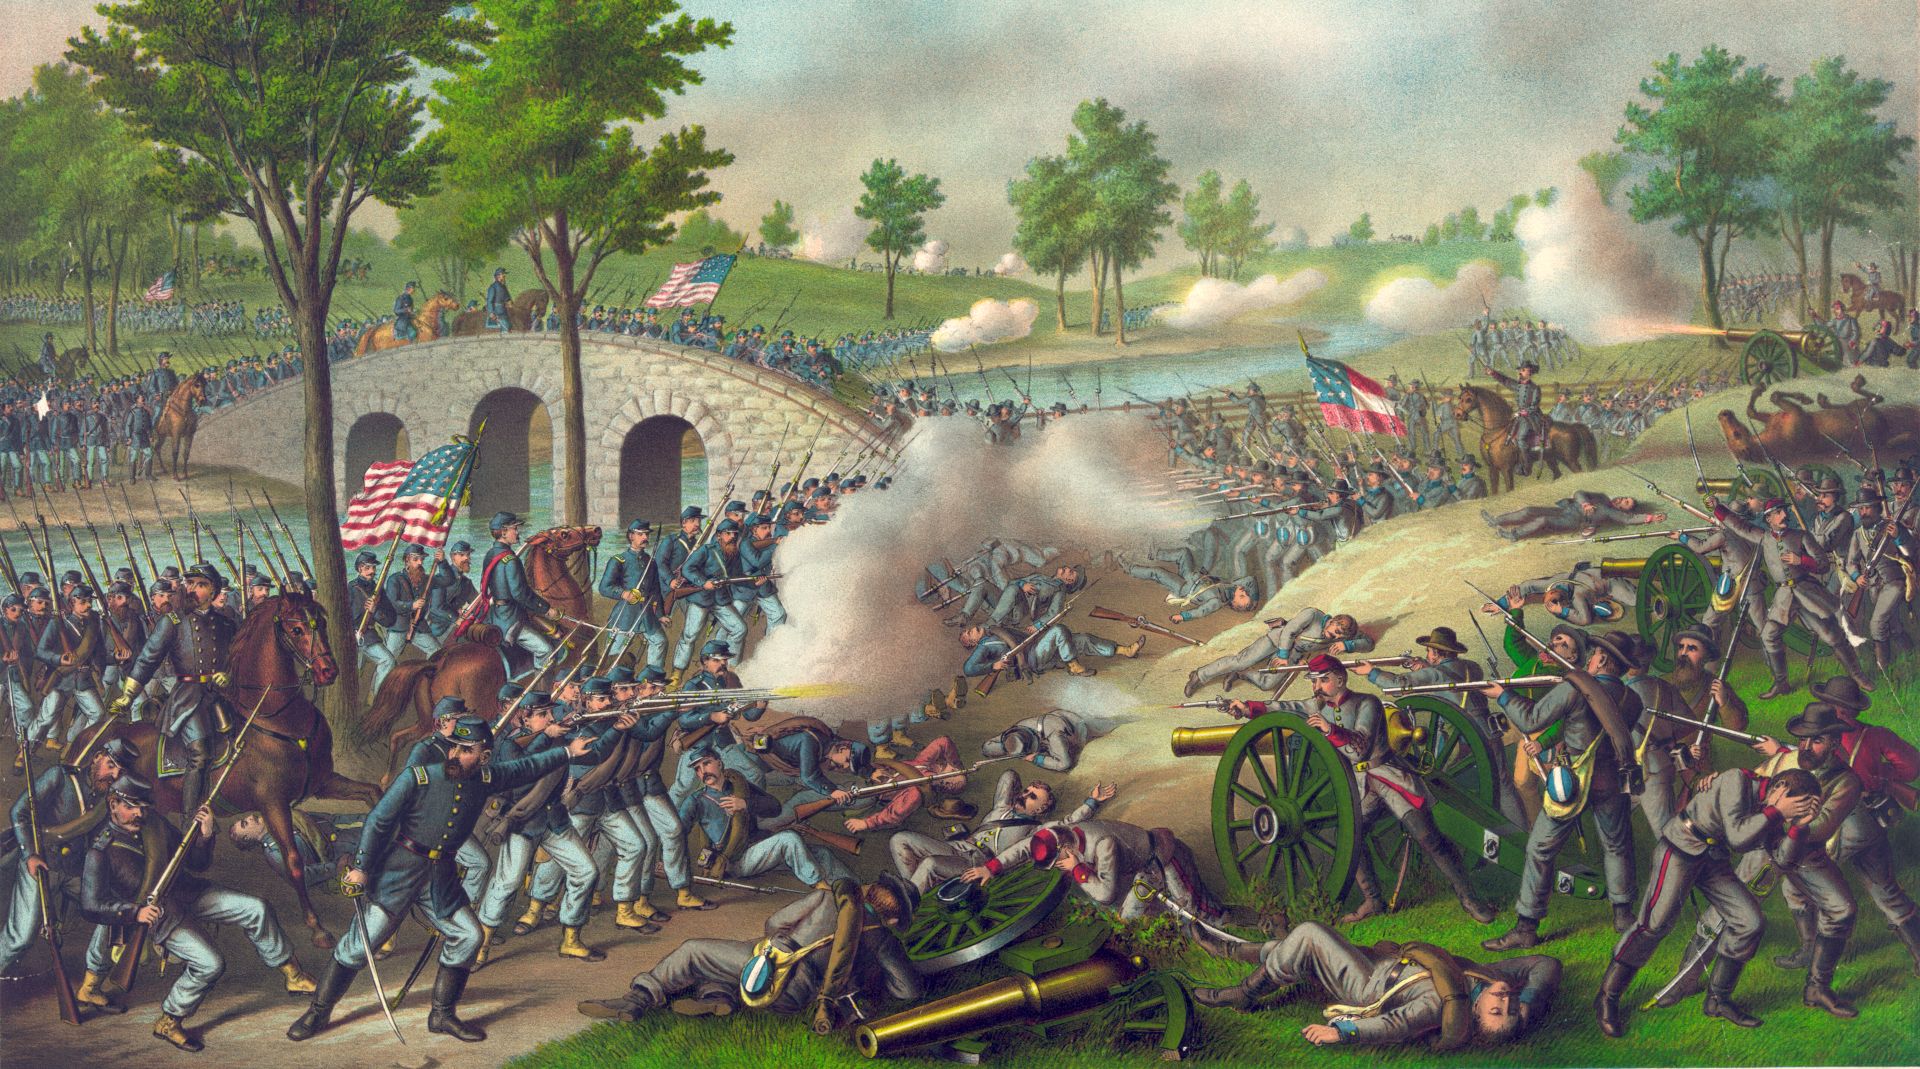 For more than three hours, Confederates defended what became known as the Burnside Bridge against attacks from larger Union forces, allowing time for Gen. Longstreet to bring his troops to aid the Rebel cause. Library of Congress.